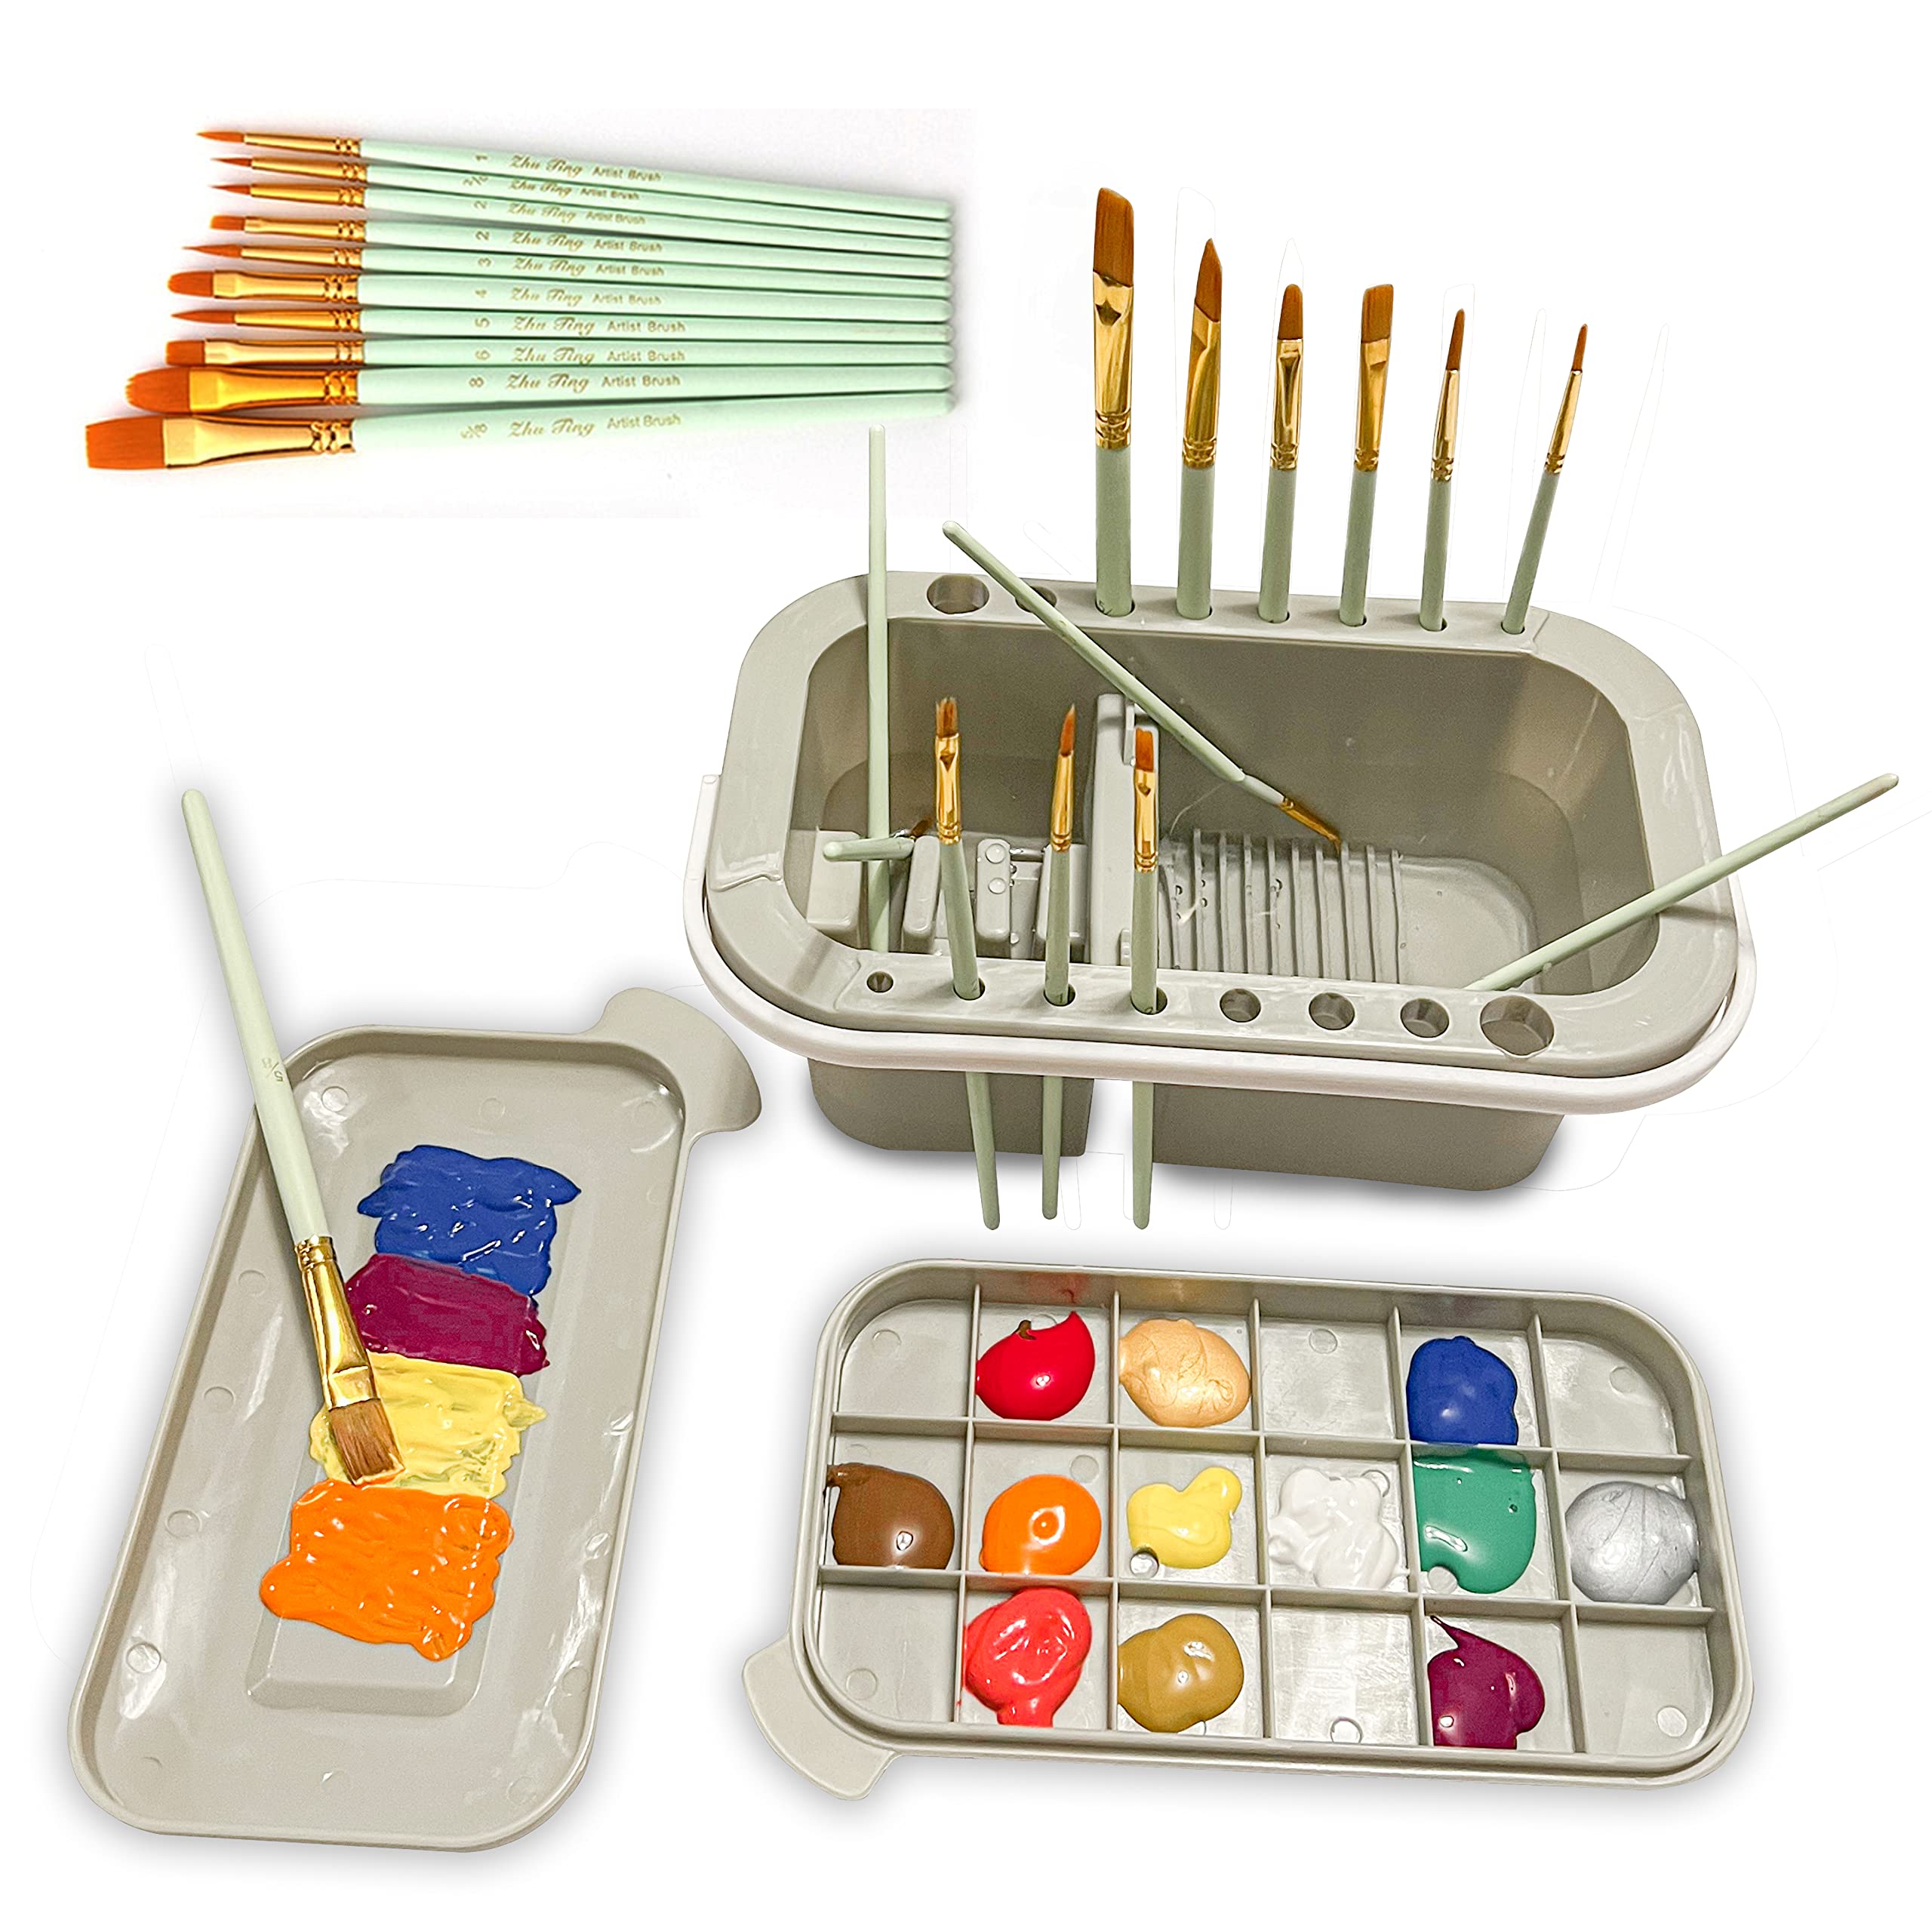 Paint Brush Cleaner, Paint Brush Holder and Organizers with